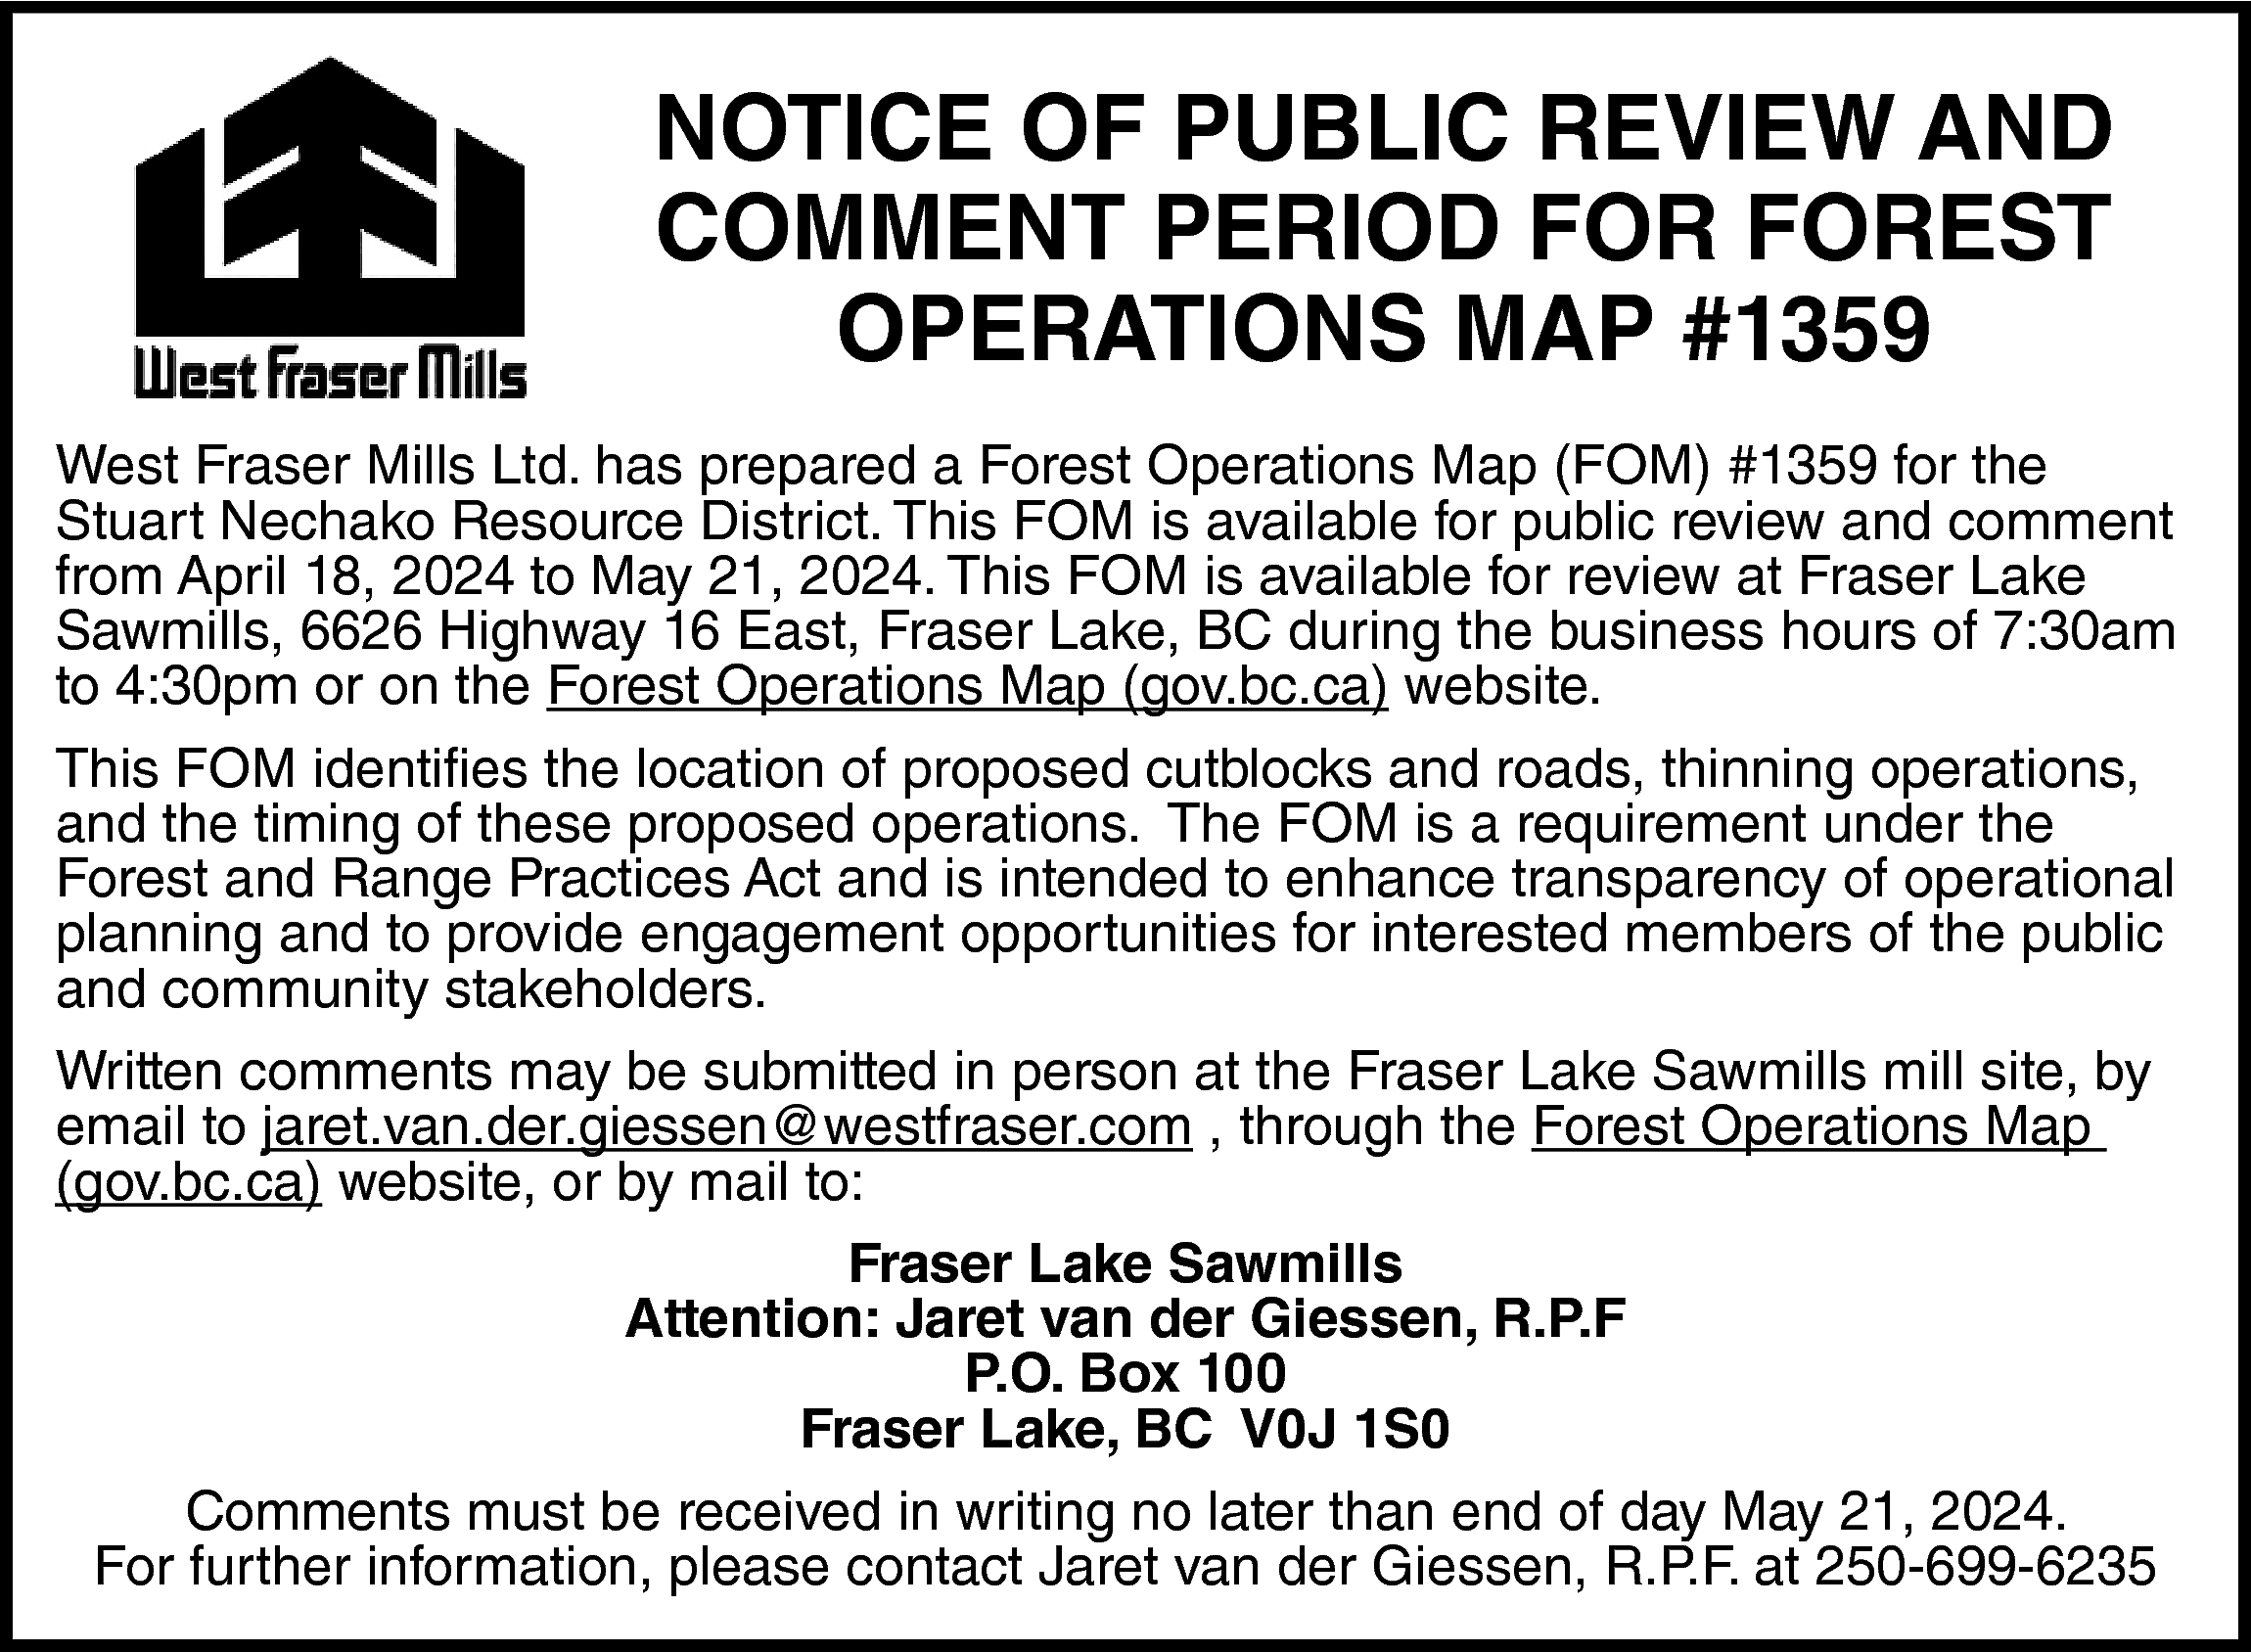 NOTICE OF PUBLIC REVIEW AND  NOTICE OF PUBLIC REVIEW AND  COMMENT PERIOD FOR FOREST  OPERATIONS MAP #1359  West Fraser Mills Ltd. has prepared a Forest Operations Map (FOM) #1359 for the  Stuart Nechako Resource District. This FOM is available for public review and comment  from April 18, 2024 to May 21, 2024. This FOM is available for review at Fraser Lake  Sawmills, 6626 Highway 16 East, Fraser Lake, BC during the business hours of 7:30am  to 4:30pm or on the Forest Operations Map (gov.bc.ca) website.  This FOM identifies the location of proposed cutblocks and roads, thinning operations,  and the timing of these proposed operations. The FOM is a requirement under the  Forest and Range Practices Act and is intended to enhance transparency of operational  planning and to provide engagement opportunities for interested members of the public  and community stakeholders.  Written comments may be submitted in person at the Fraser Lake Sawmills mill site, by  email to jaret.van.der.giessen@westfraser.com , through the Forest Operations Map  (gov.bc.ca) website, or by mail to:  Fraser Lake Sawmills  Attention: Jaret van der Giessen, R.P.F  P.O. Box 100  Fraser Lake, BC V0J 1S0  Comments must be received in writing no later than end of day May 21, 2024.  For further information, please contact Jaret van der Giessen, R.P.F. at 250-699-6235    